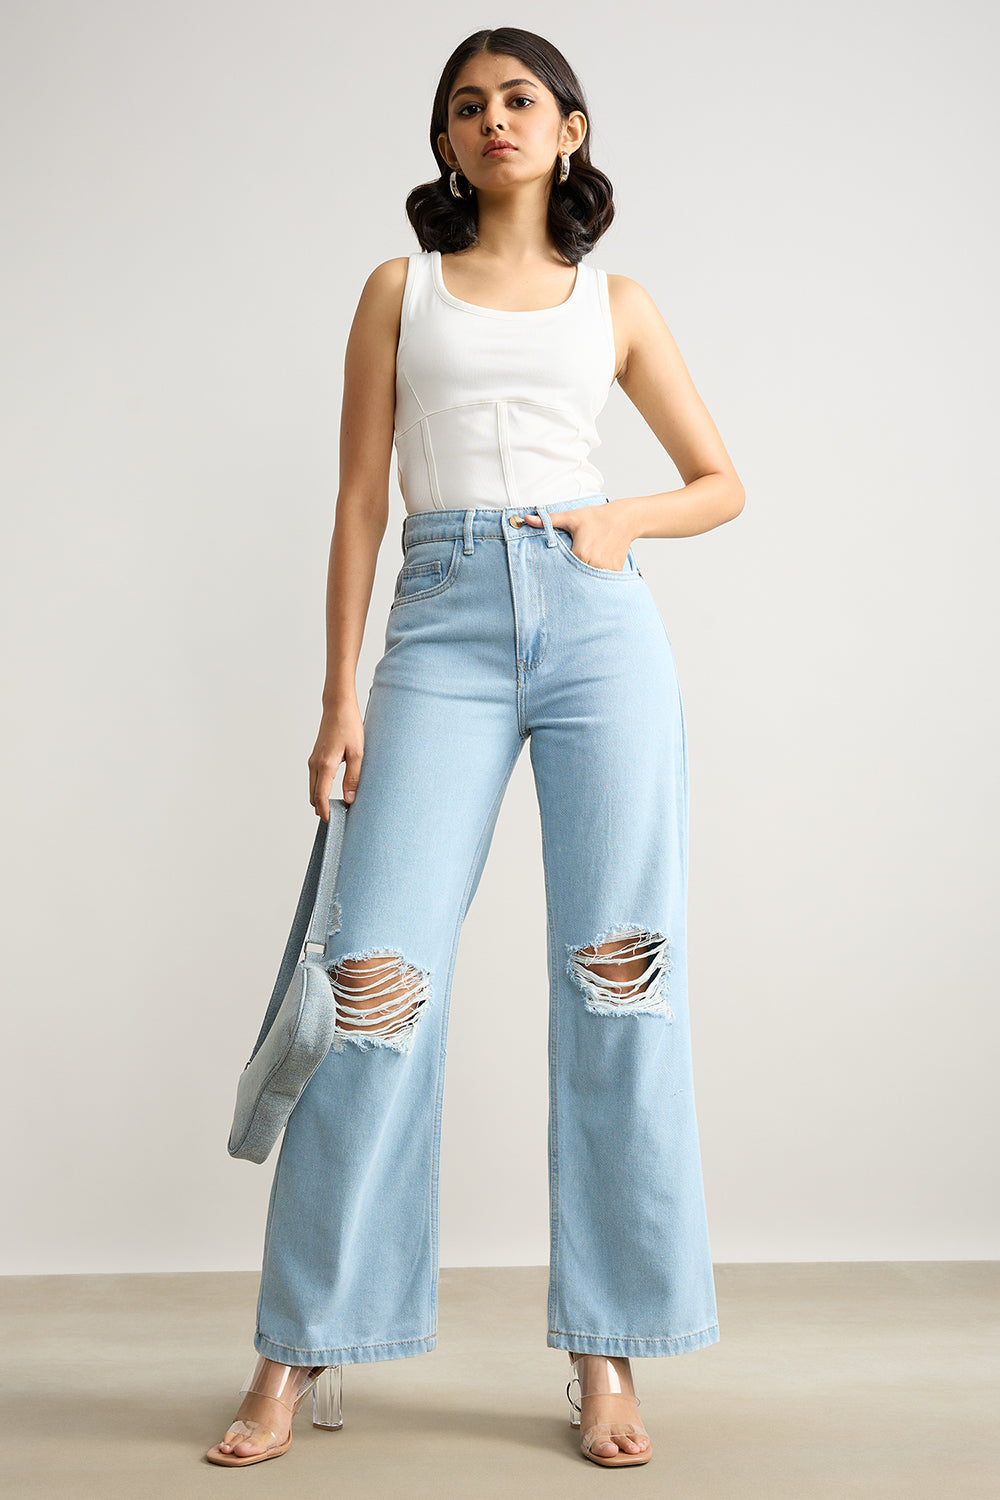 HIGH WAISTED DISTRESSED LIGHT BLUE JEANS